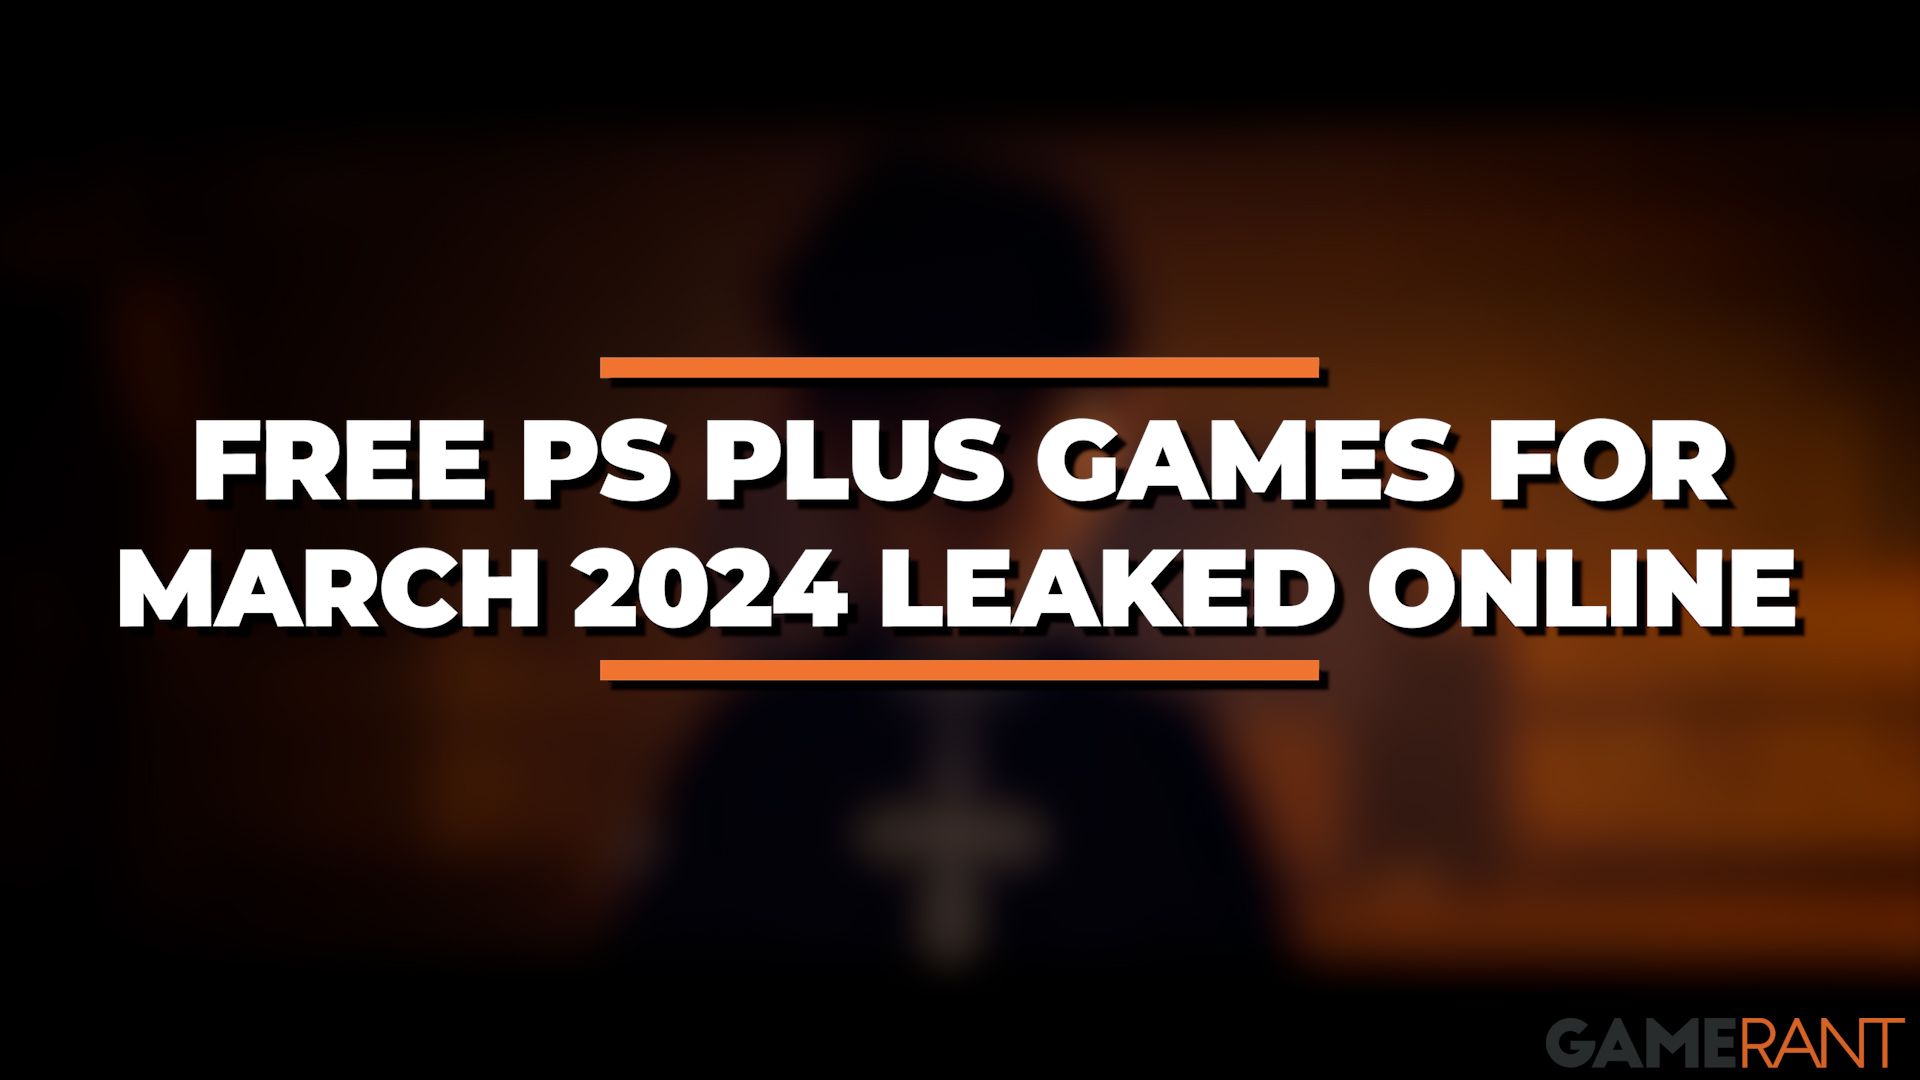 Free PS Plus Game for March 2024 Leaked Online